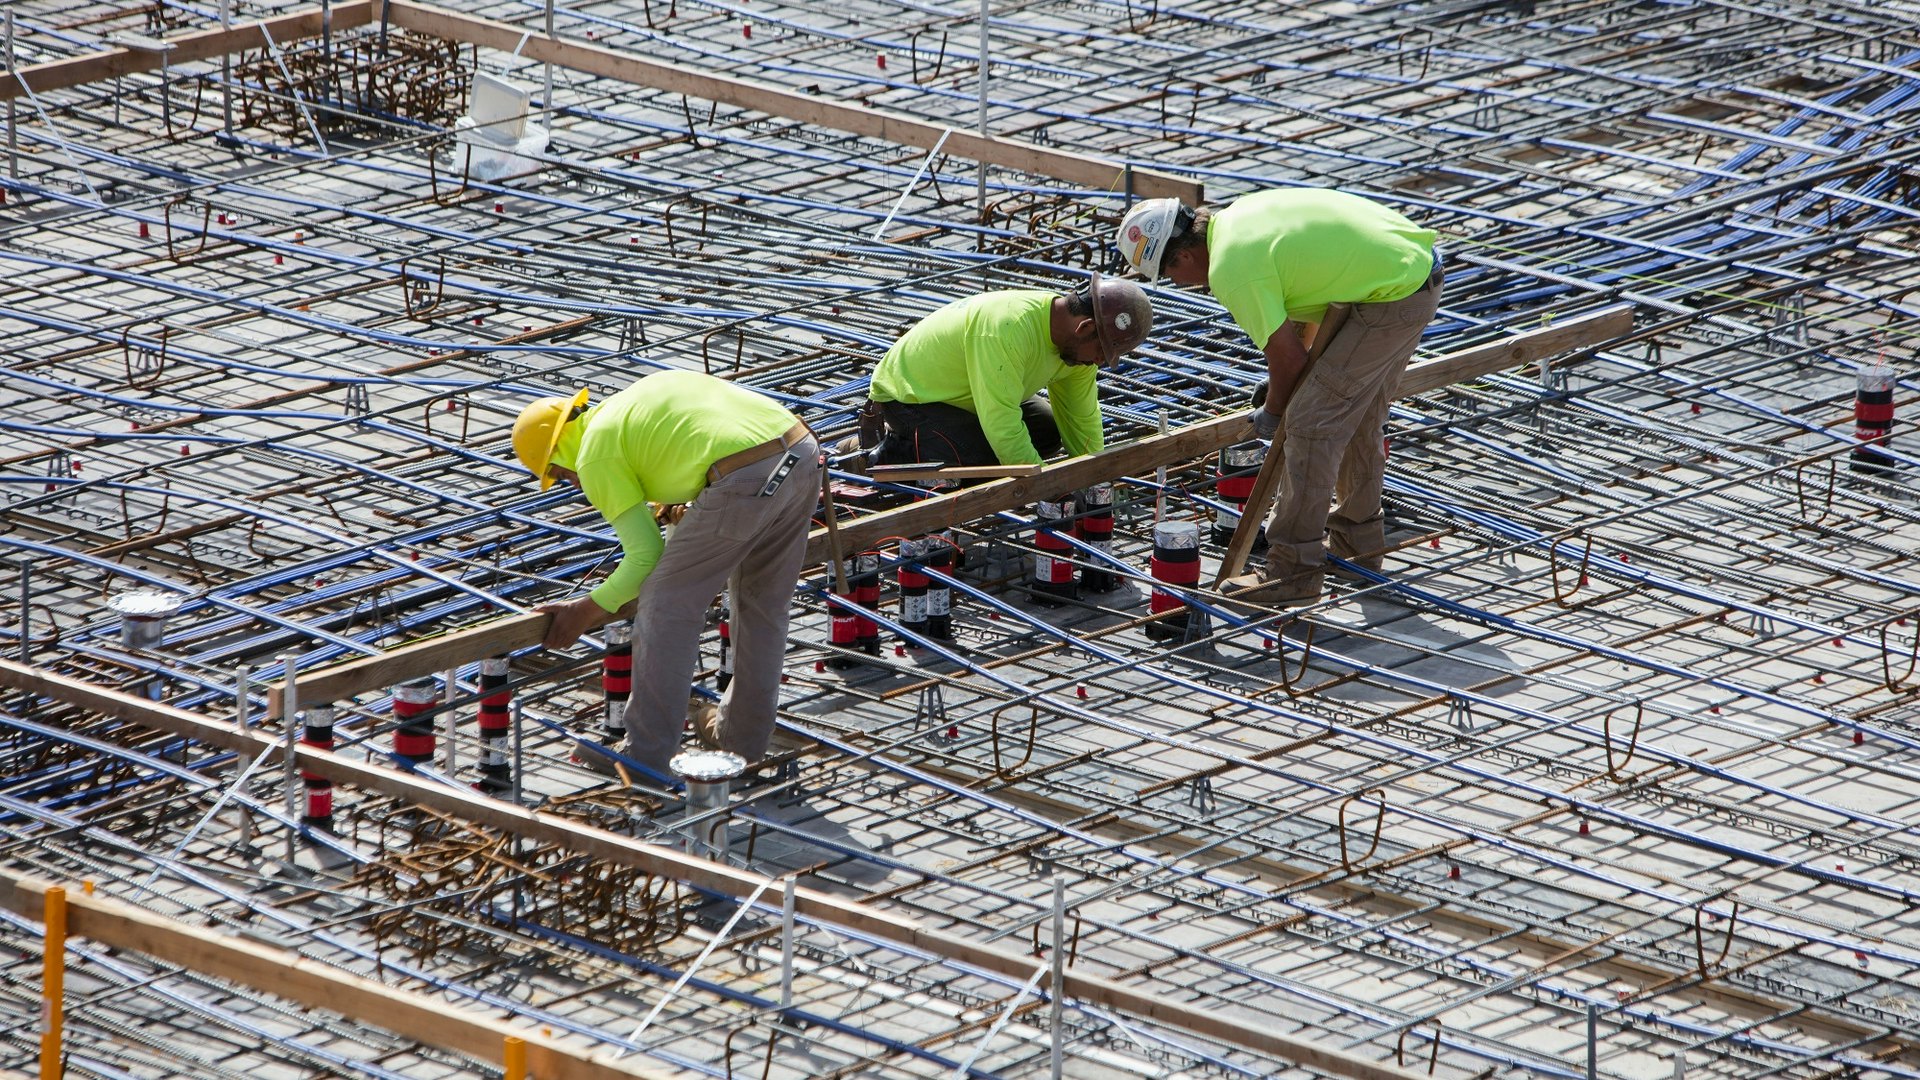 Associated General Contractors reports the average construction worker hourly wage in May rose faster than it has in 40 years, and employment went up by 36,000 workers.